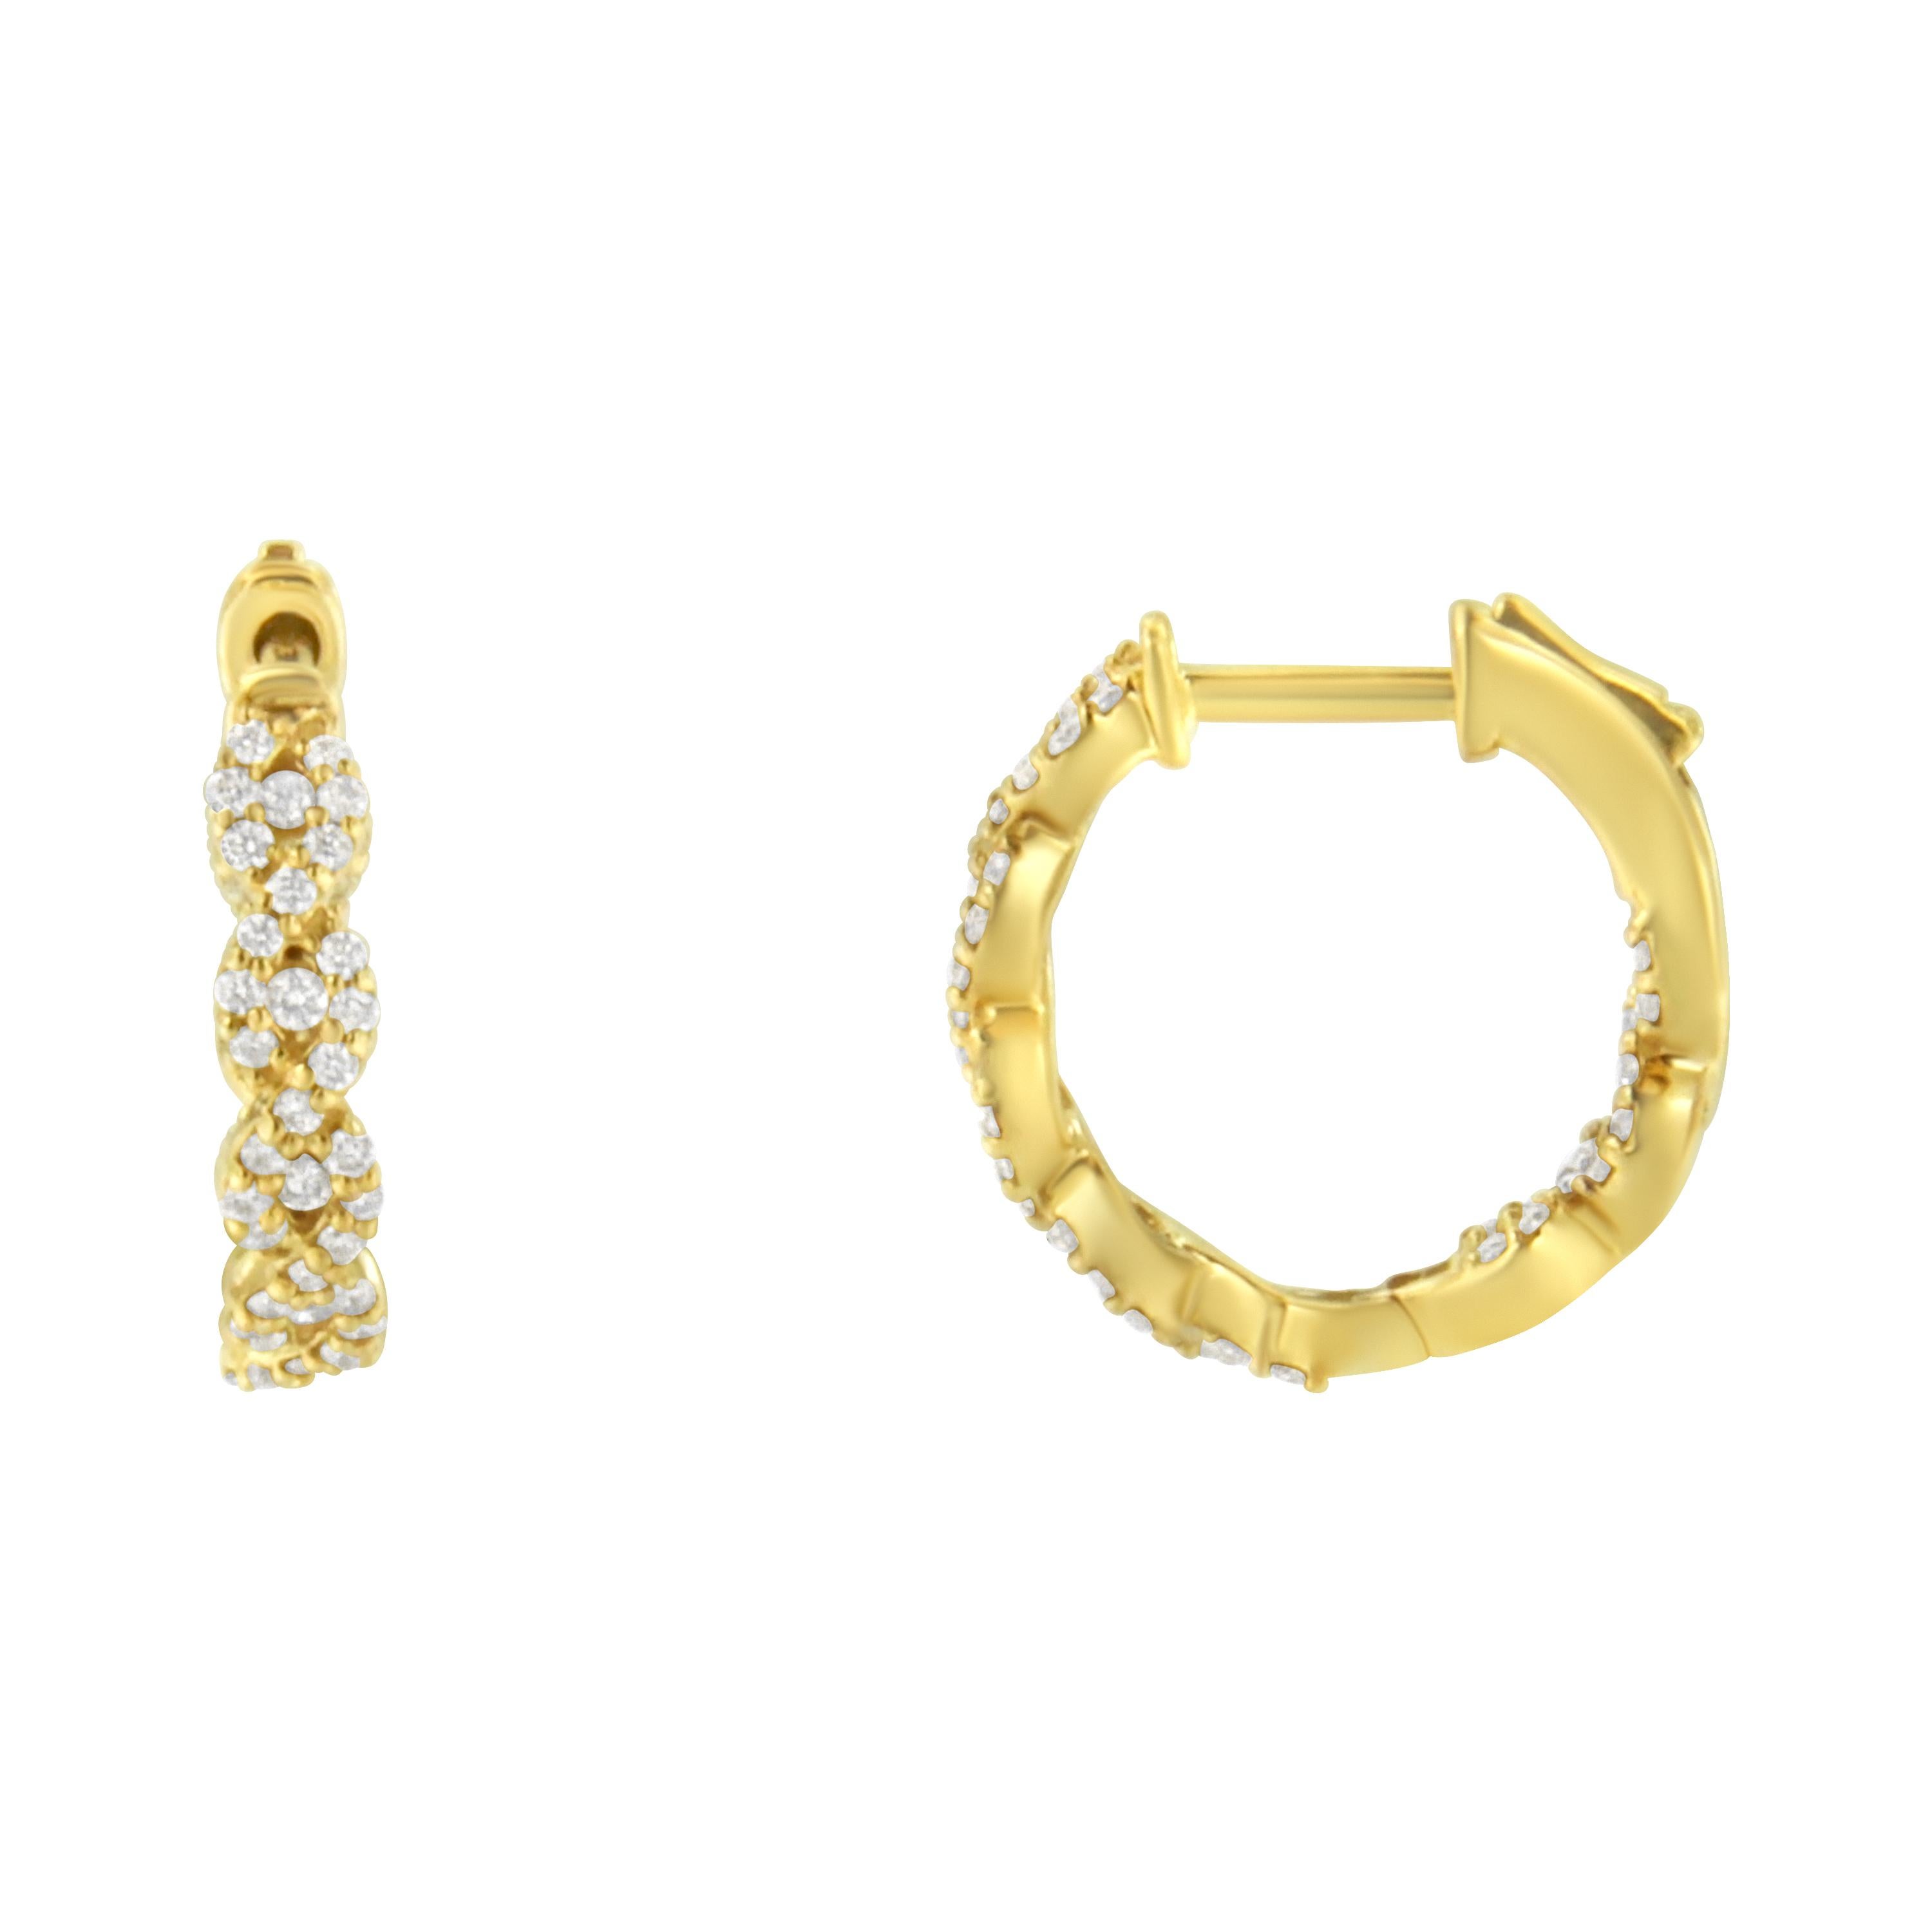 Inlaying both the front and back side of these striking 10k yellow gold huggy loop earrings, are 1/2ct of brilliant round cut diamonds with lever backs that keep them securely in place. These unique design is perfect for everyday wear. Product